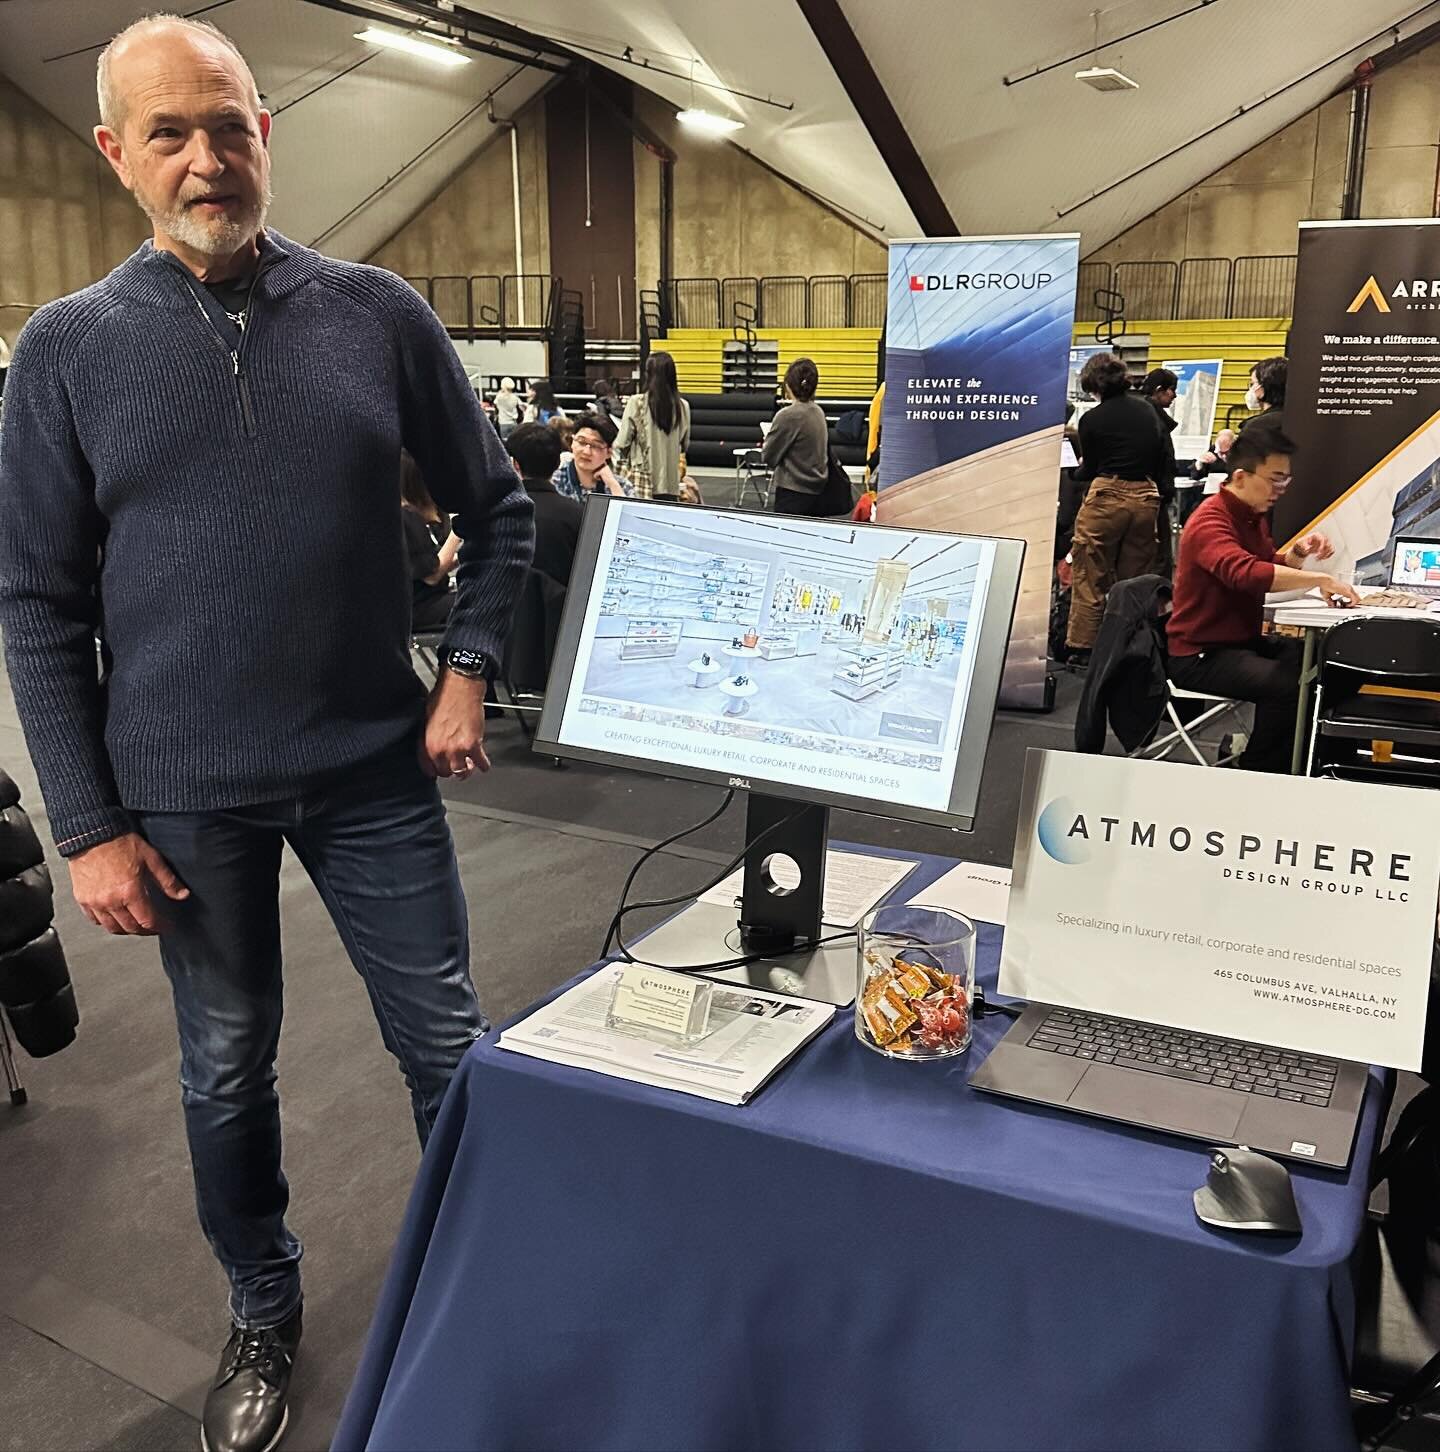 Thank you to all the wonderfully talented students and alumni who visited our table at the Pratt Spring Career Day last Friday! We loved the enthusiasm for the field of architecture, interiors and luxury retail!

#architecturestudents #jobfair #colle